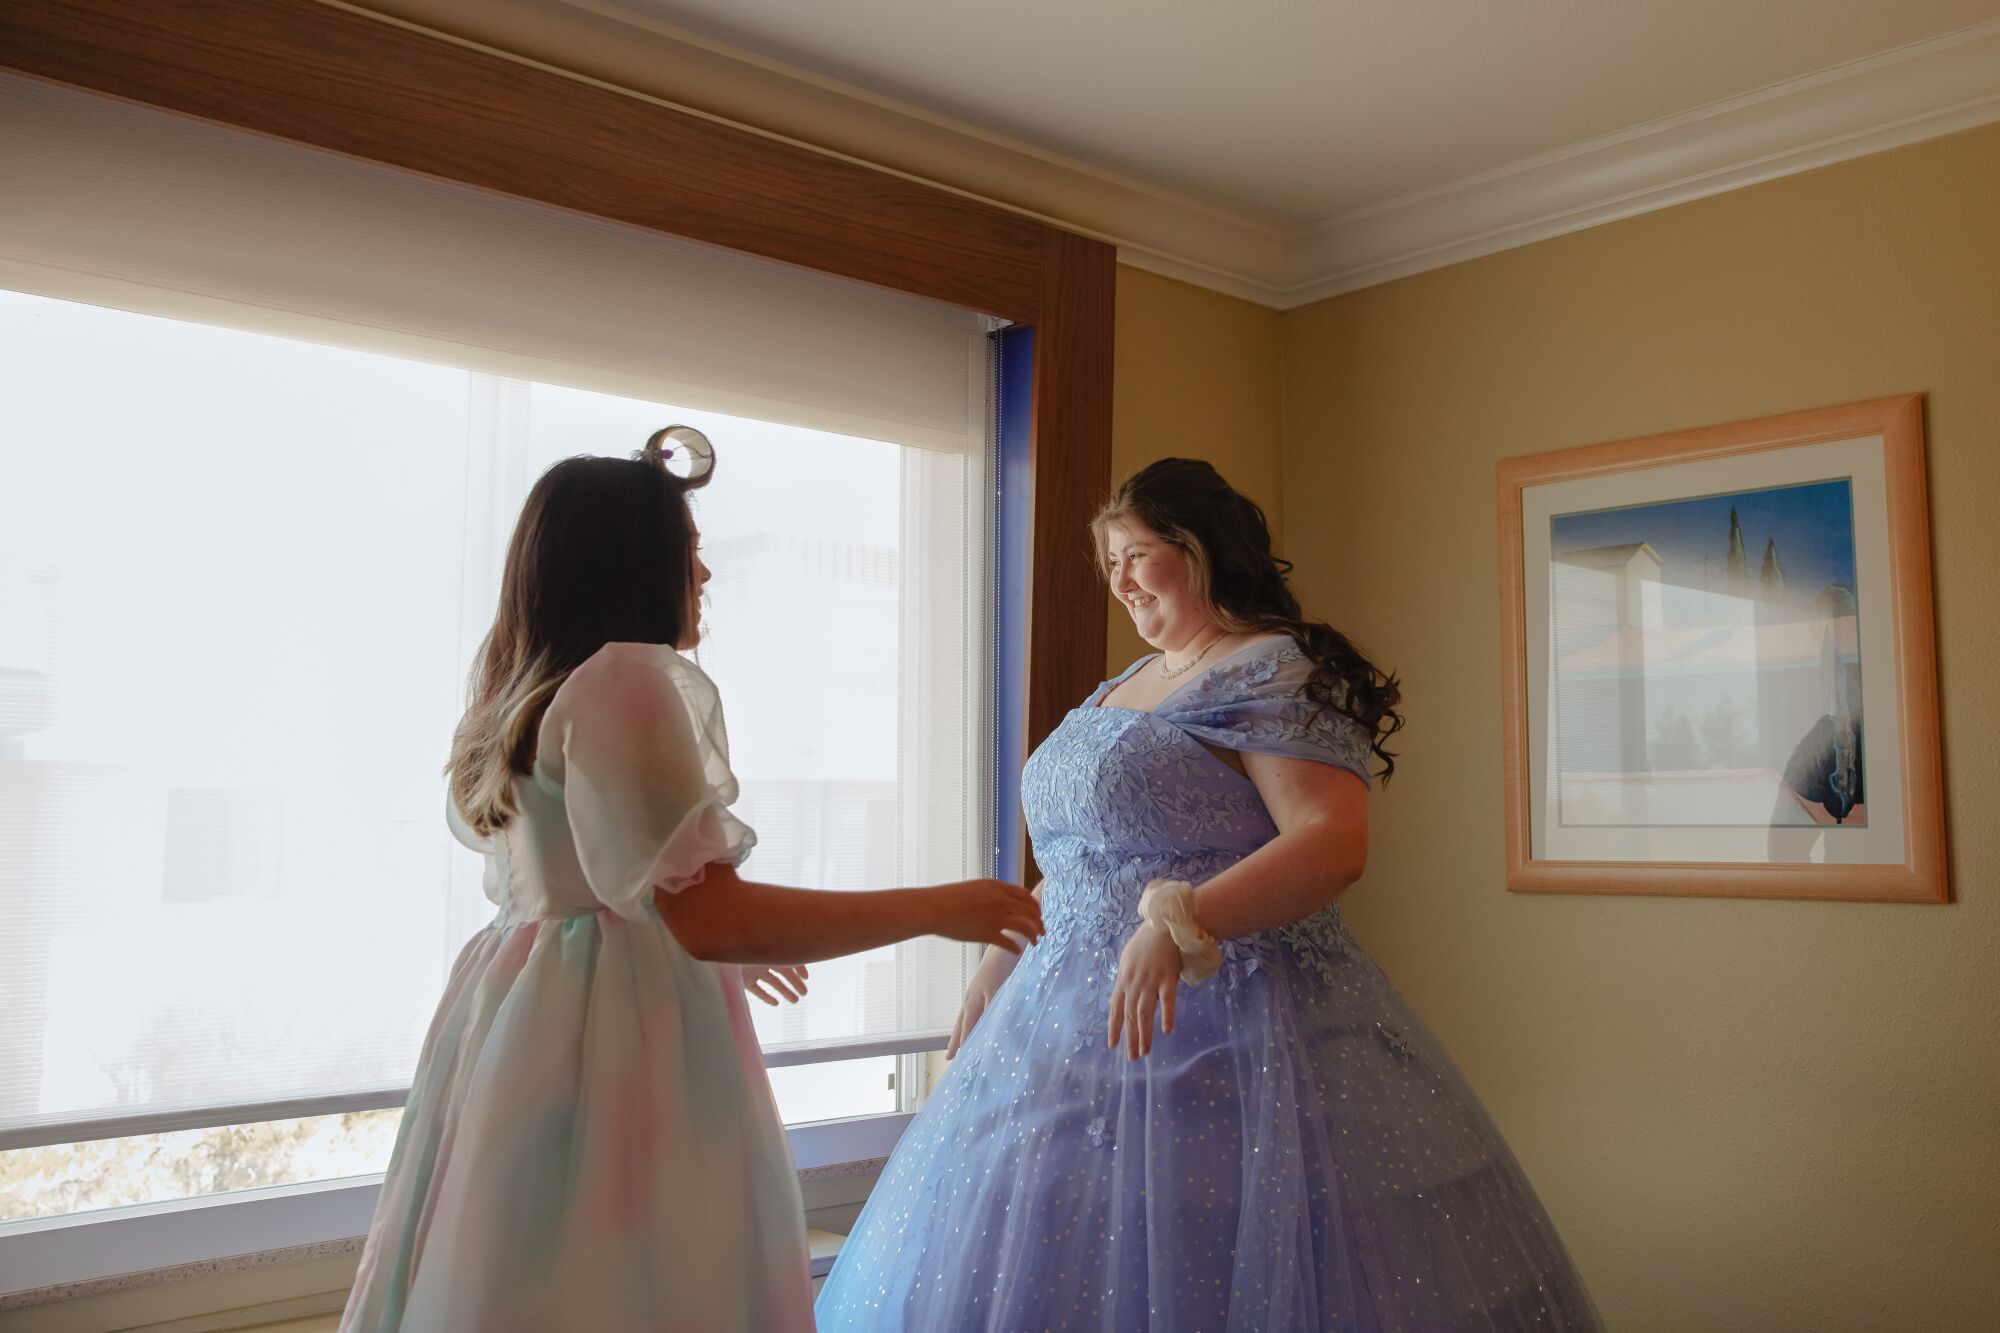 Two women in ball gowns stand in front of a window.